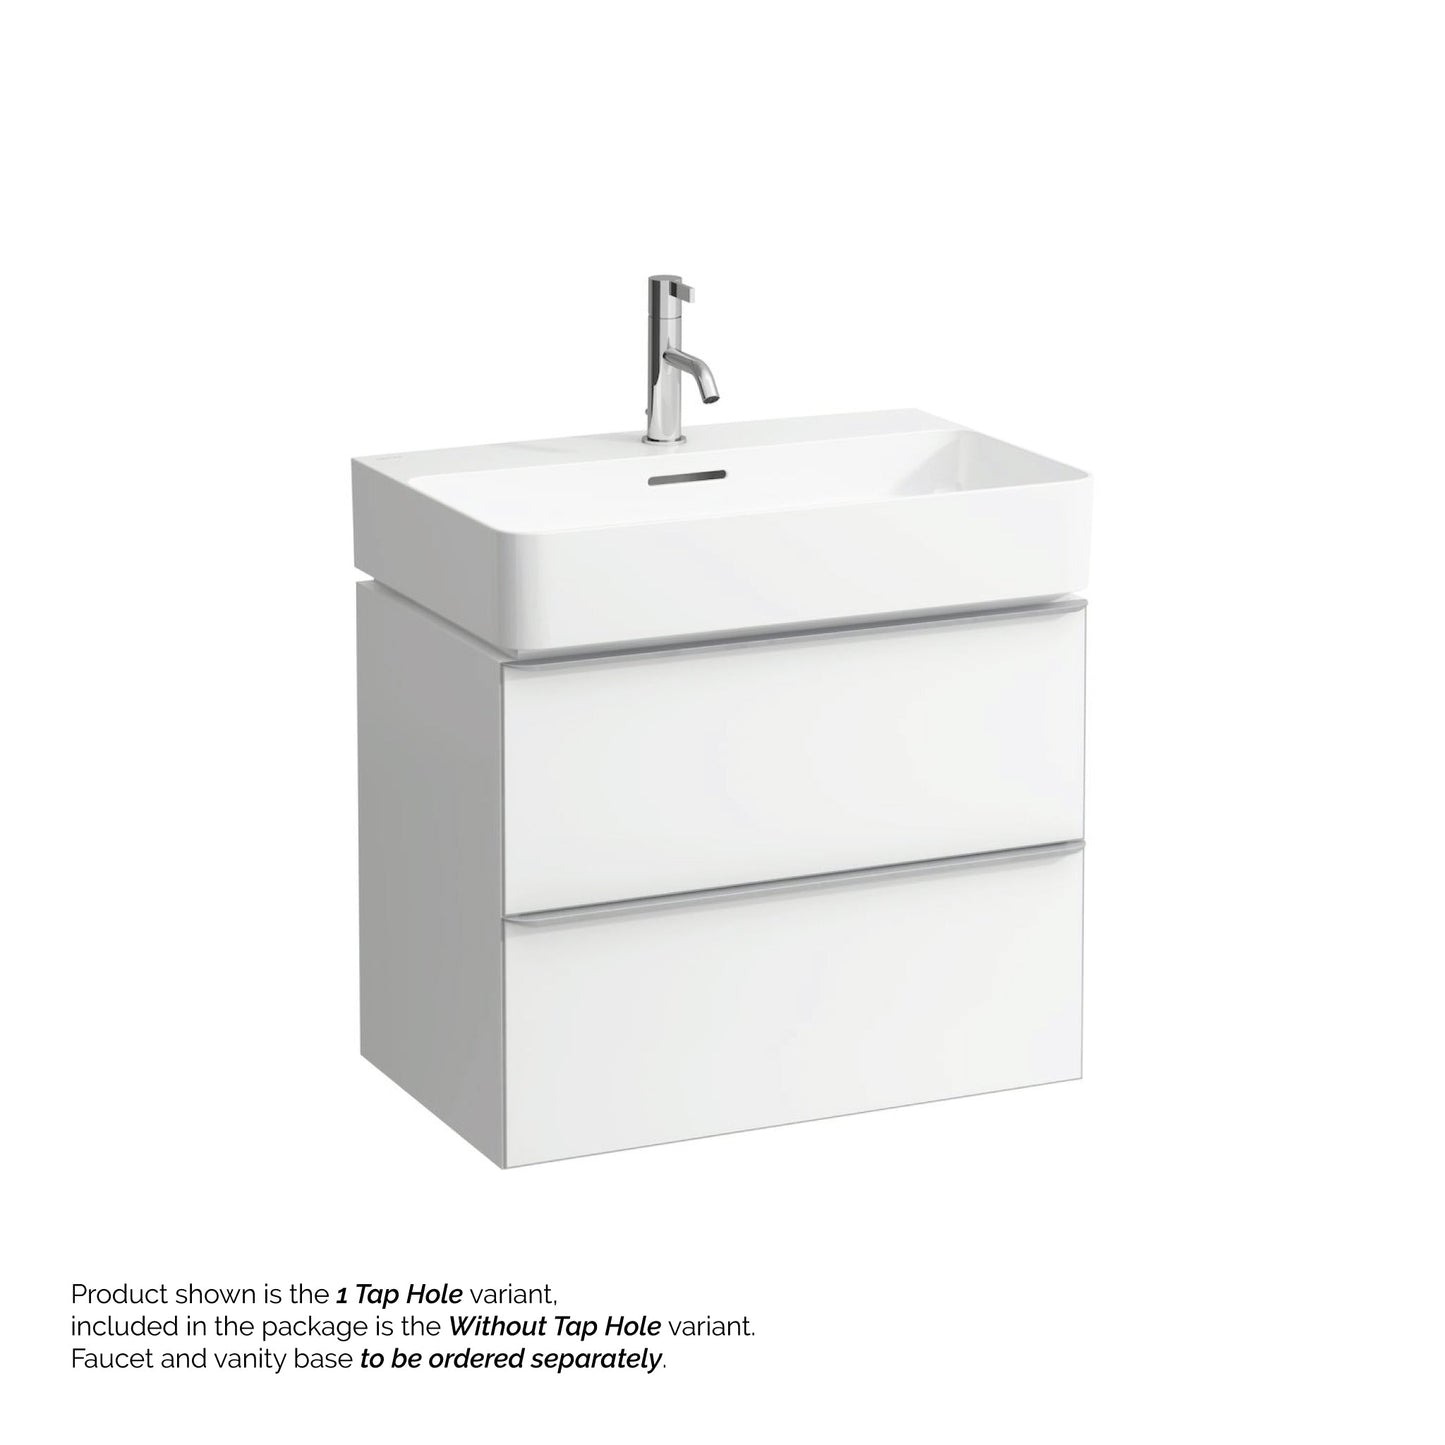 Laufen Val 26" x 17" White Ceramic Wall-Mounted Bathroom Sink Without Faucet Hole